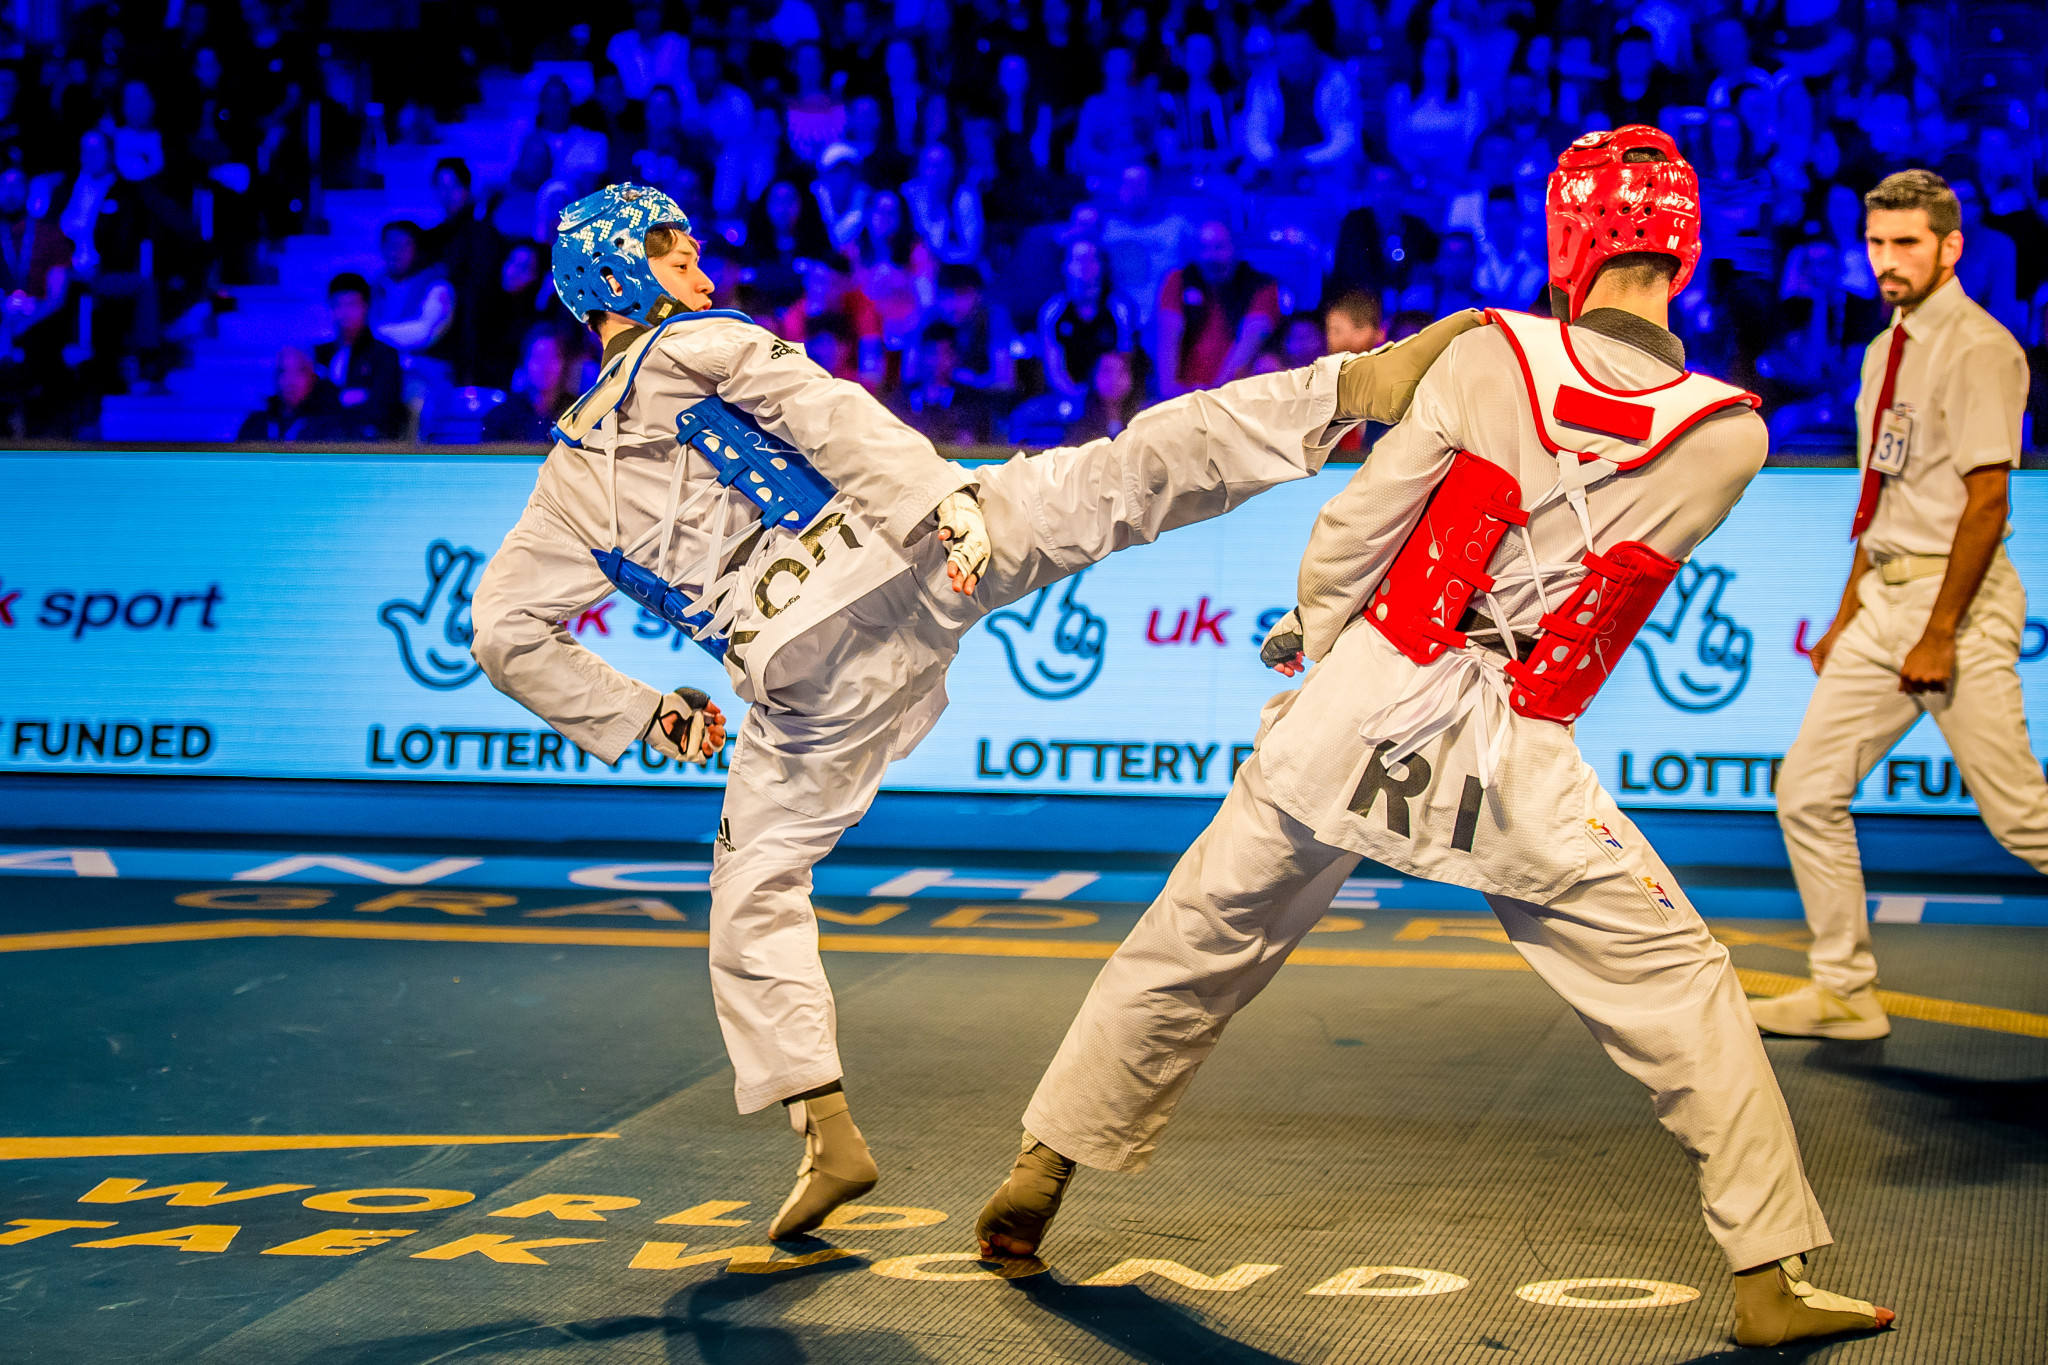 South Korea's Dae-Hoon Lee backed up his world number one status with gold in Manchester ©World Taekwondo